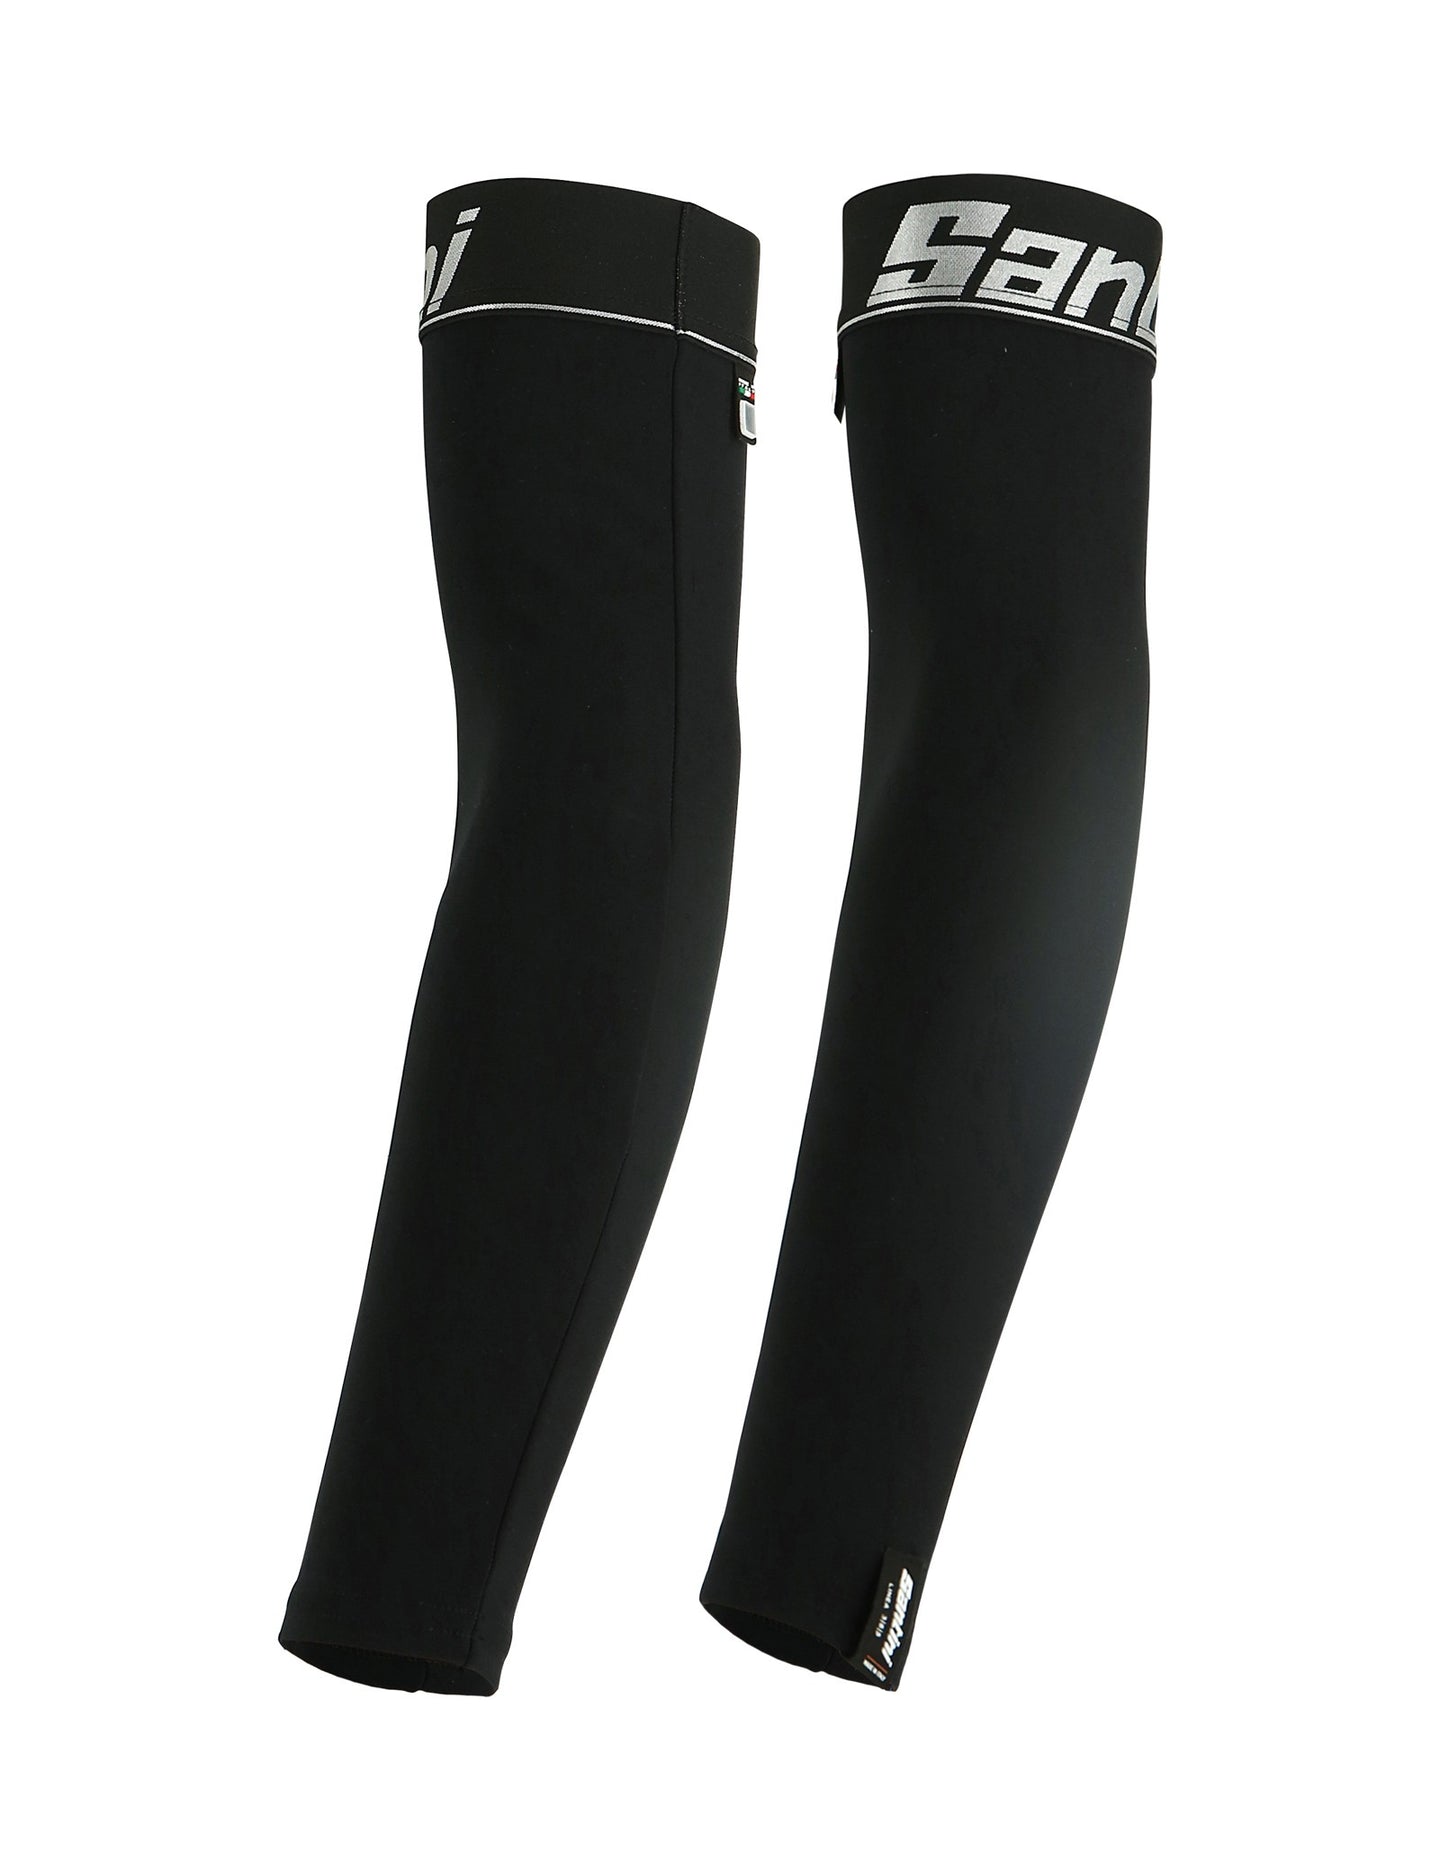 Nuhot Arm Warmers by Santini | Cento Cycling